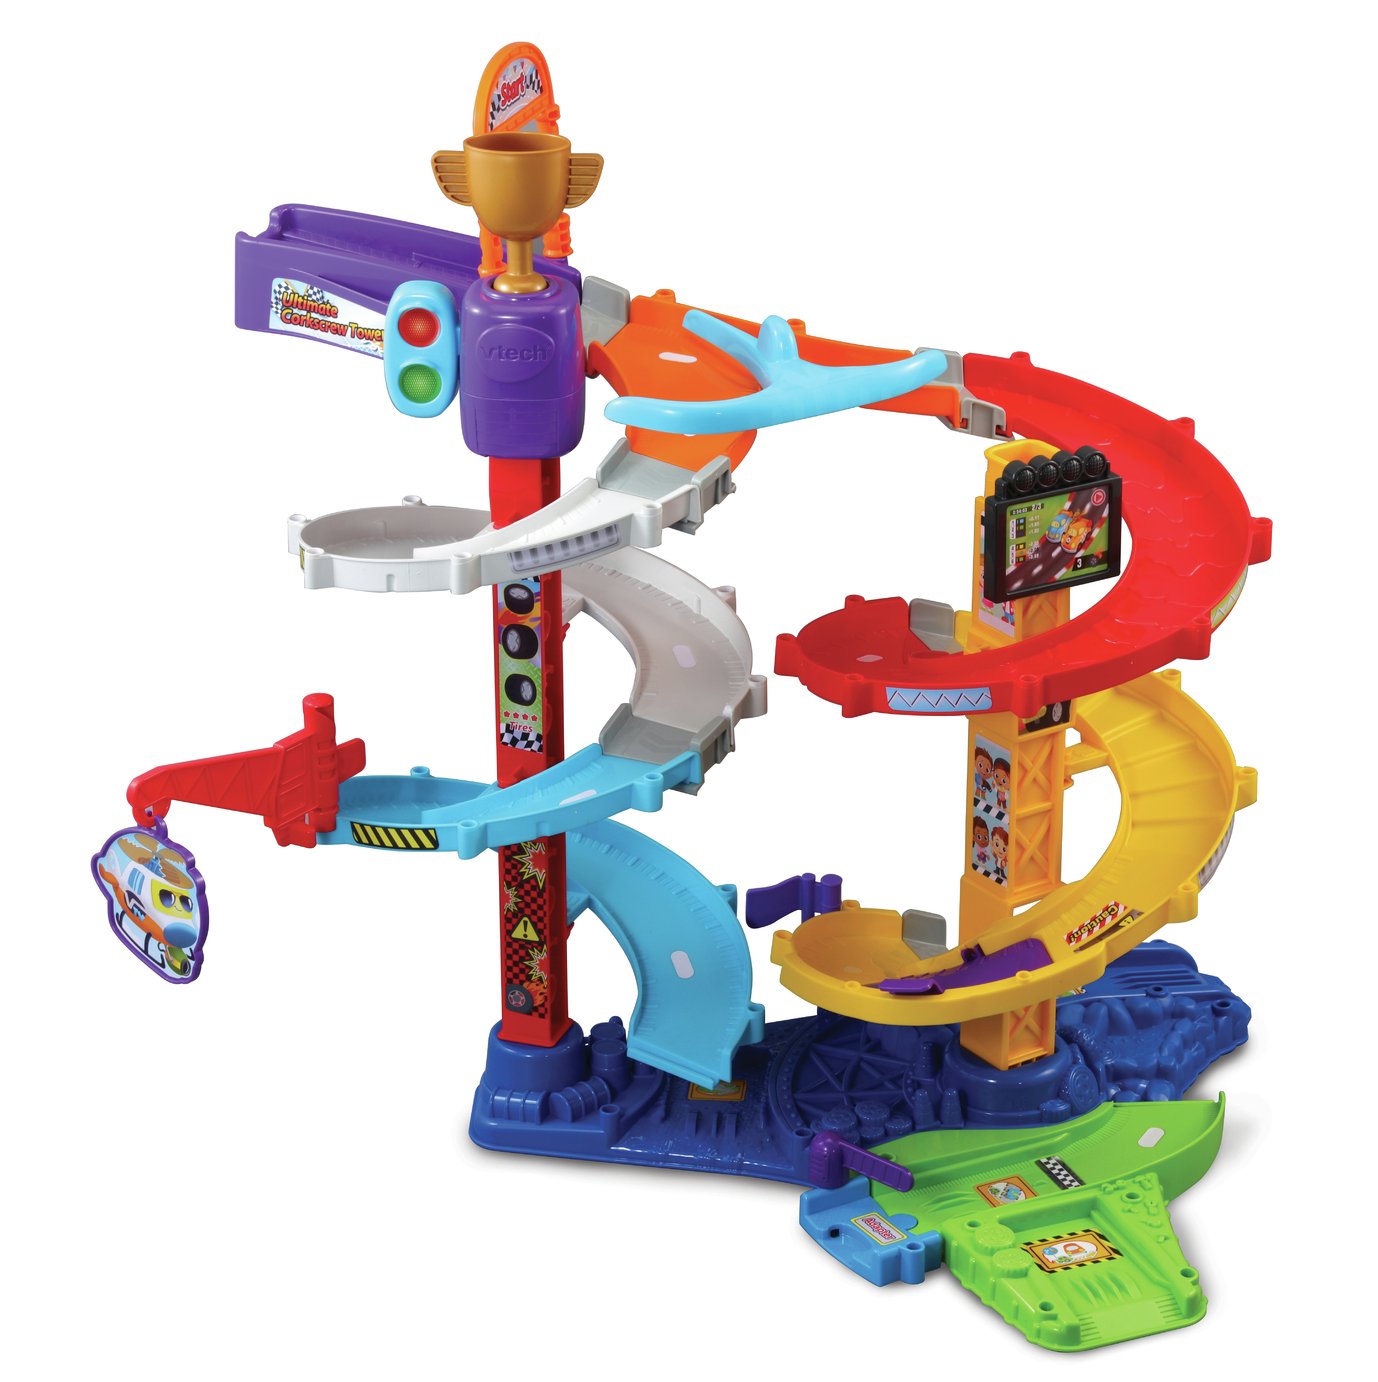 vtech sit to stand dancing tower argos